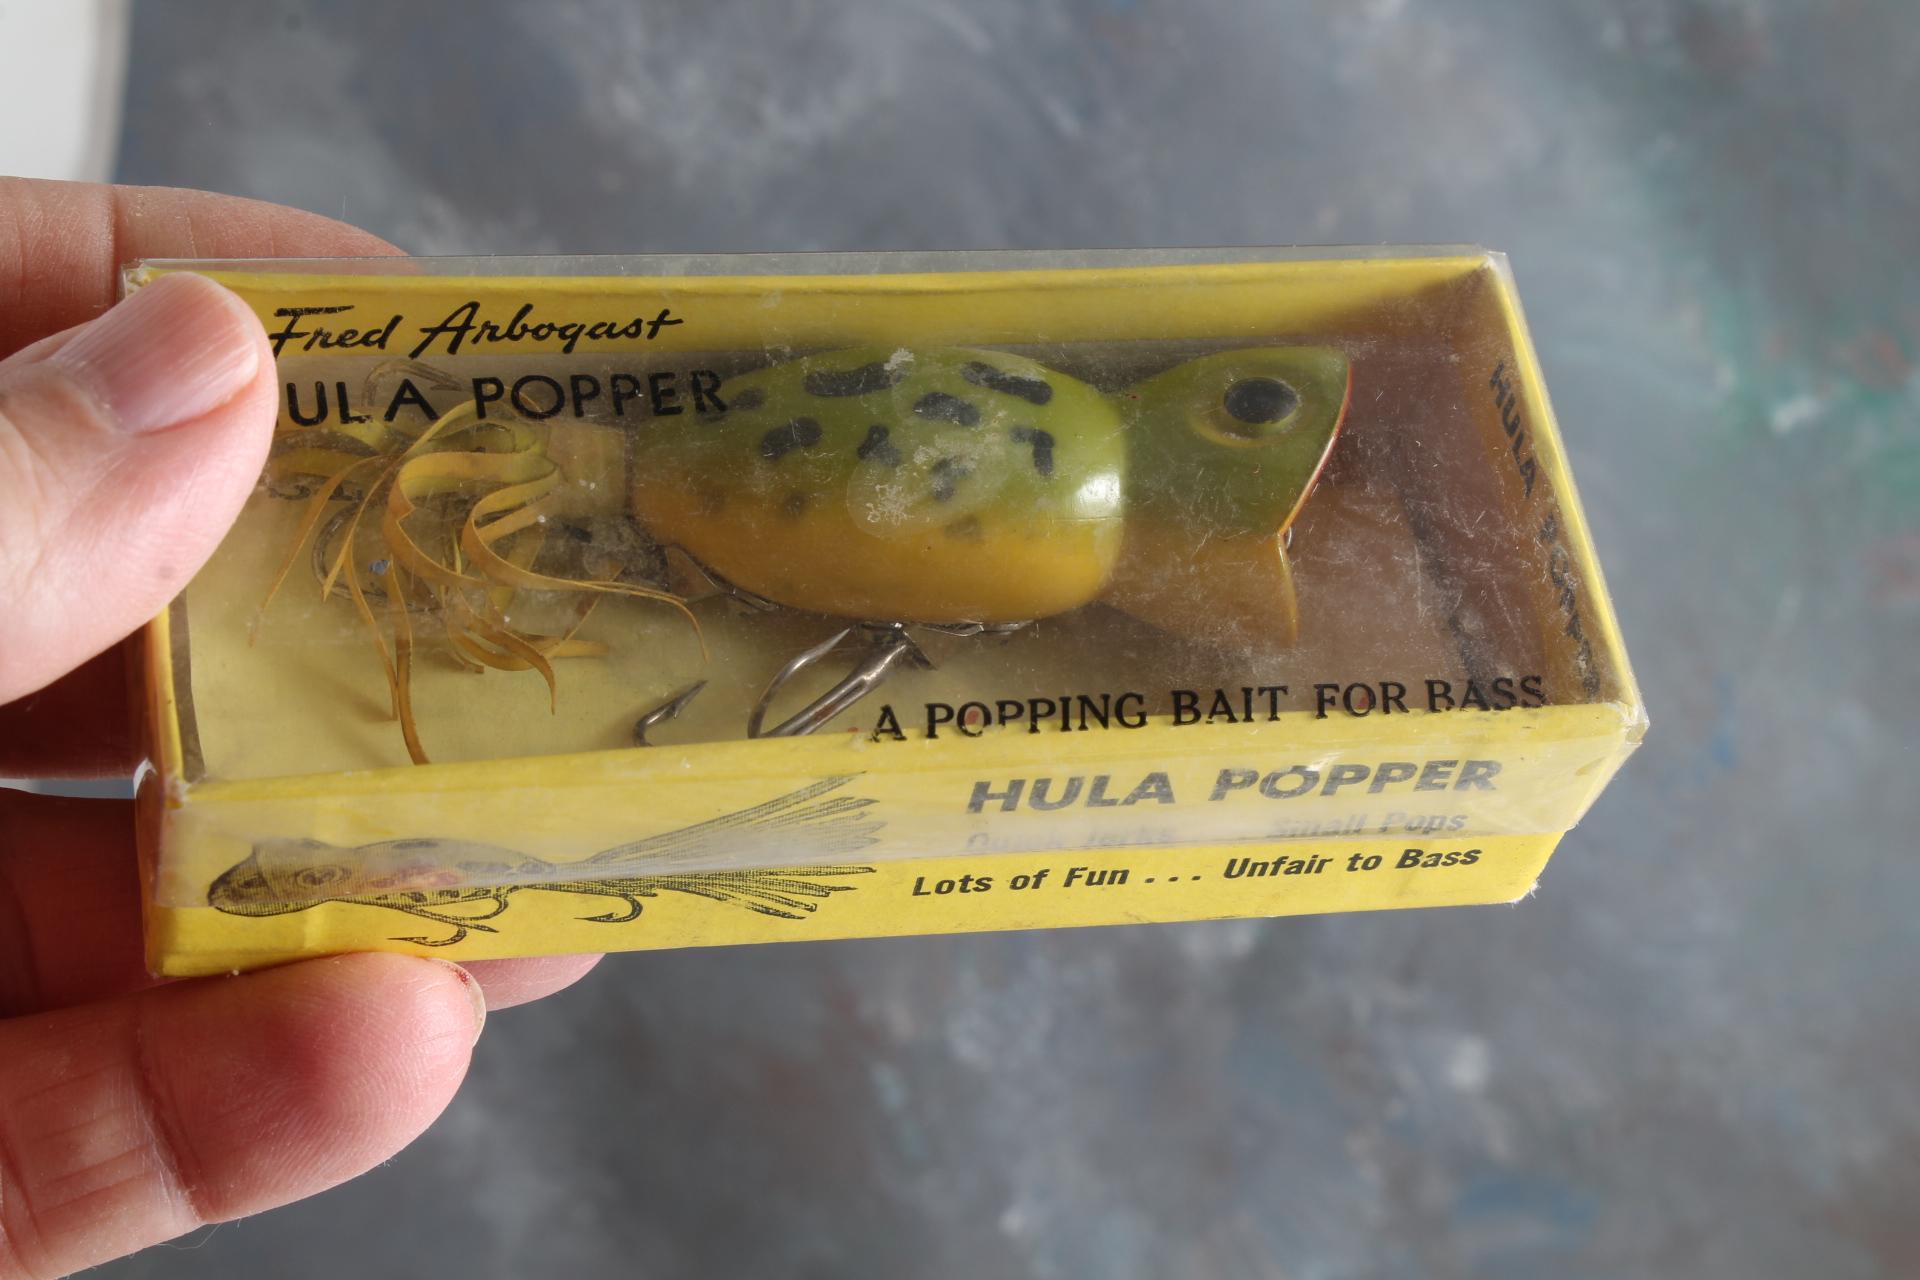 Vintage Fred Arbogast Hula Popper Fishing Lure in Box with Paper